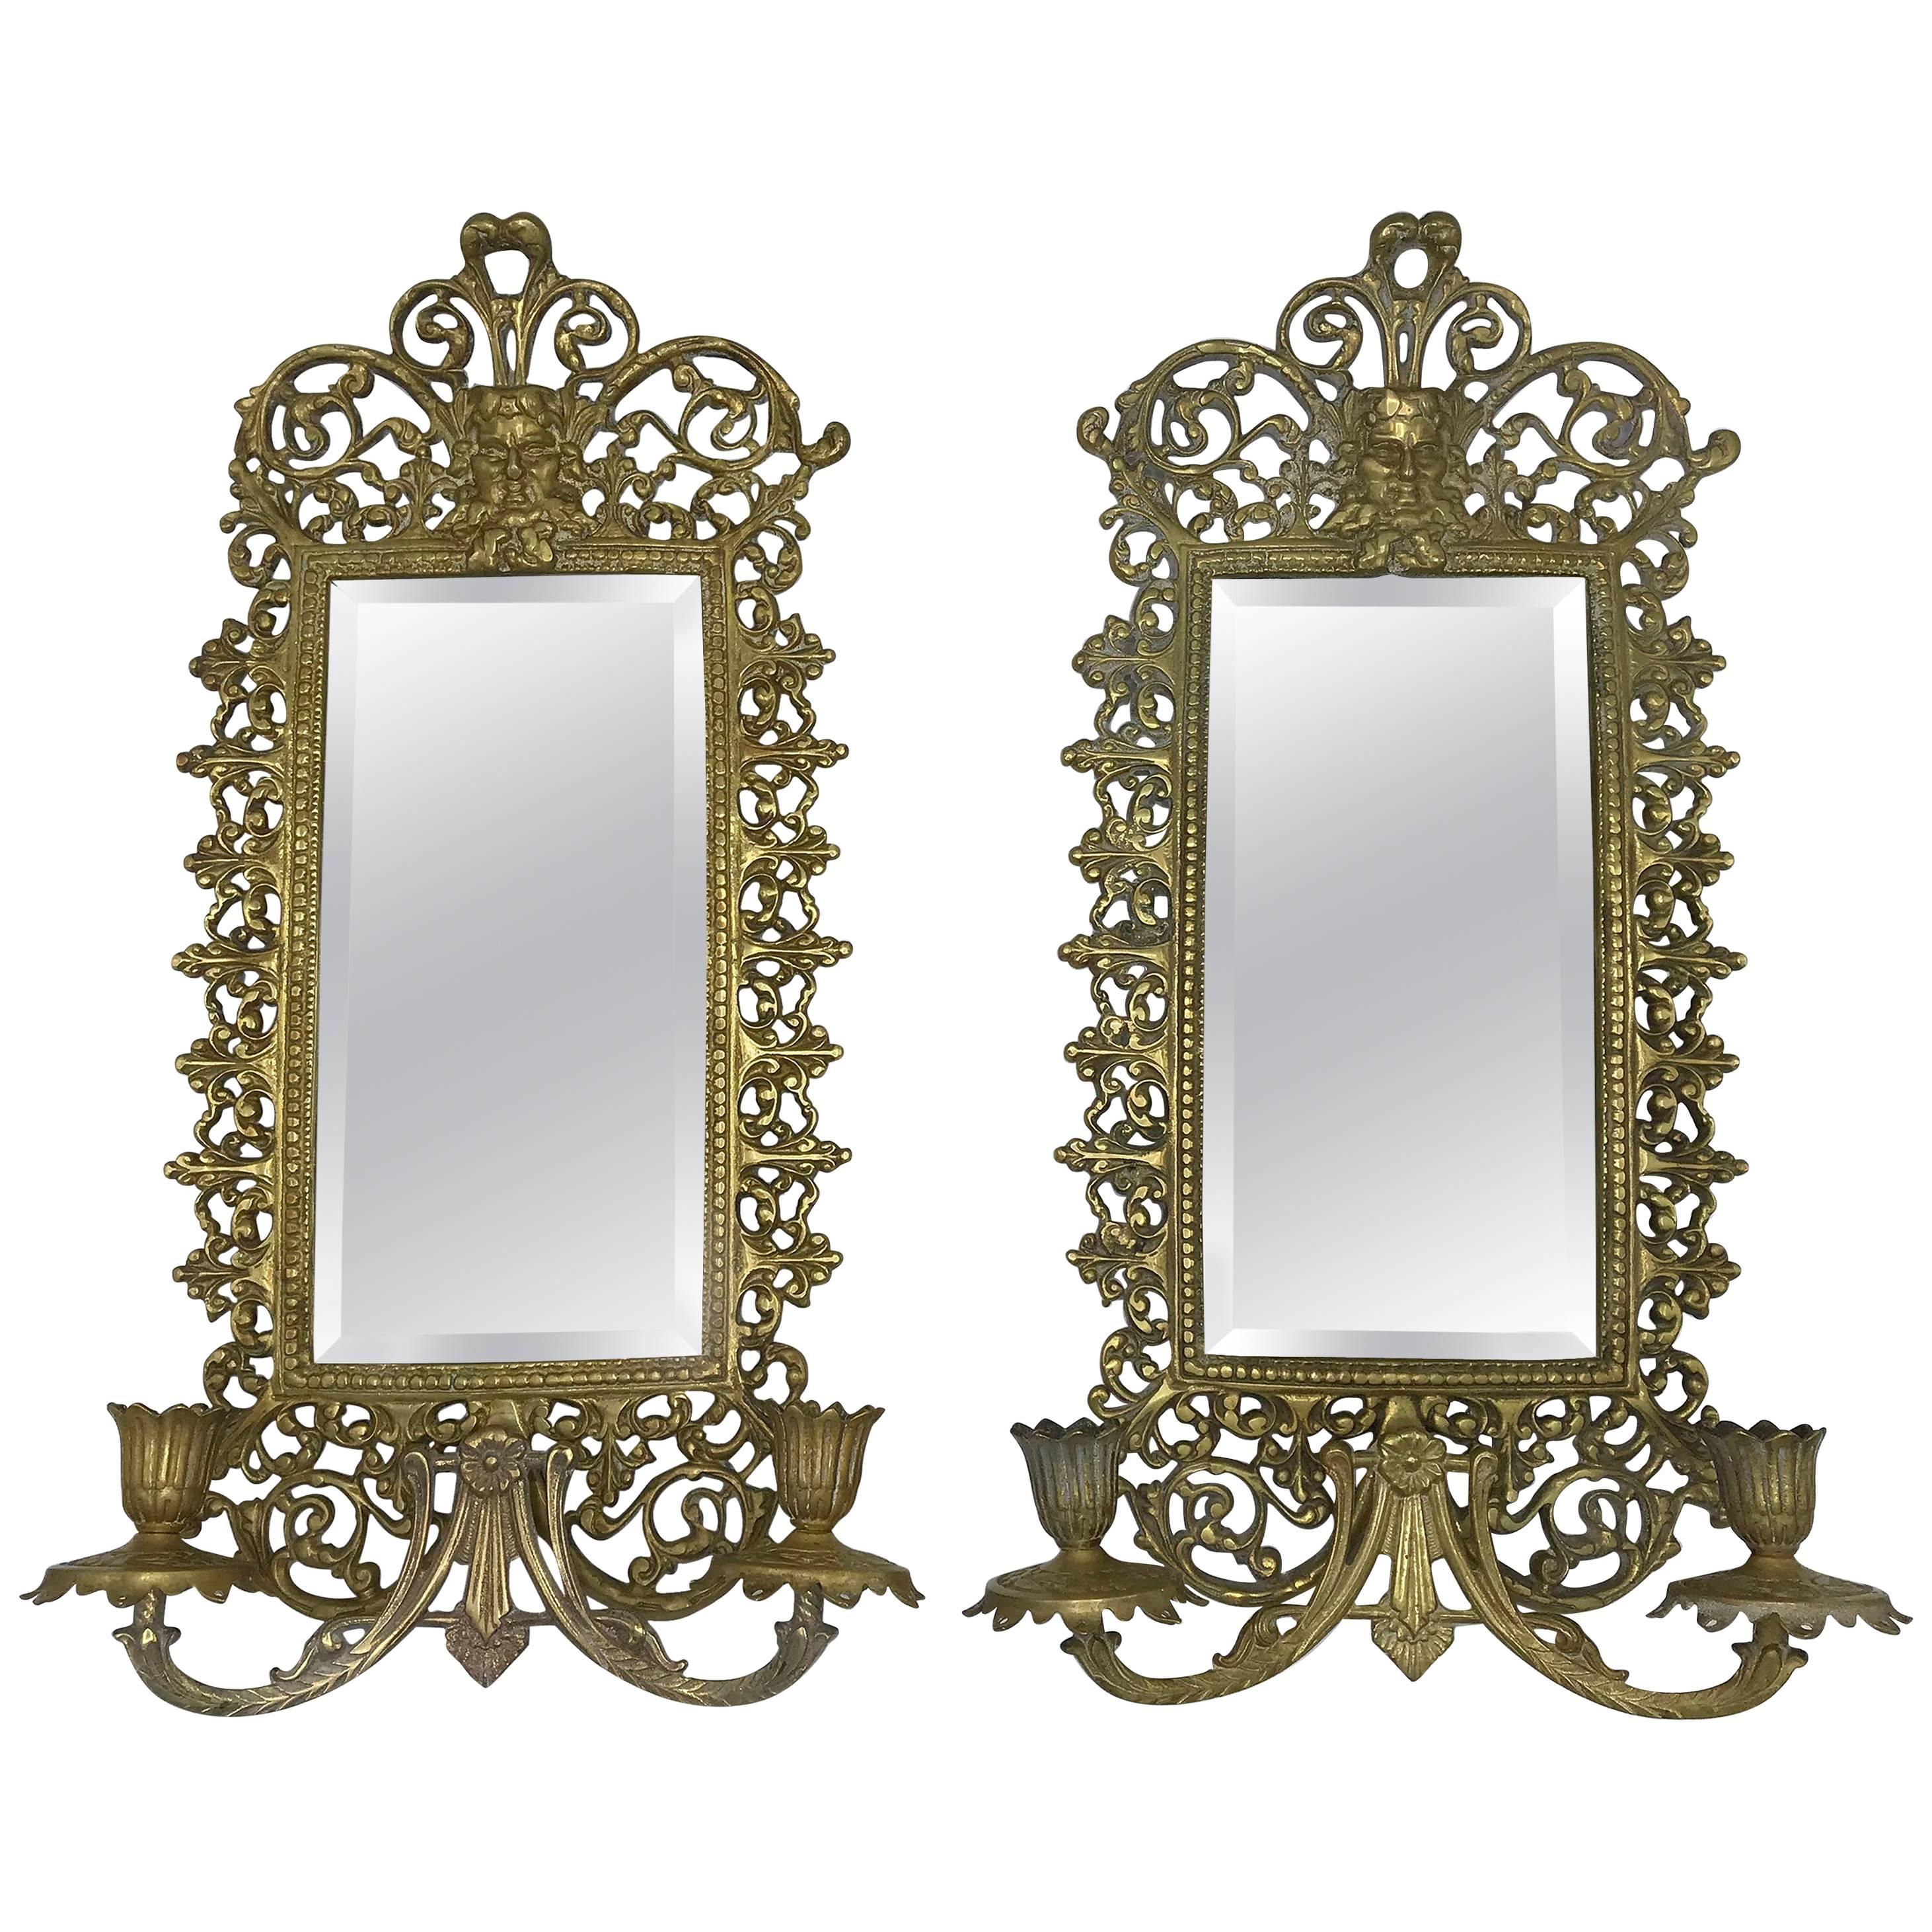 1960s Virginia Metalcrafters Rococo Style Double-Arm Mirrored Sconces, Pair